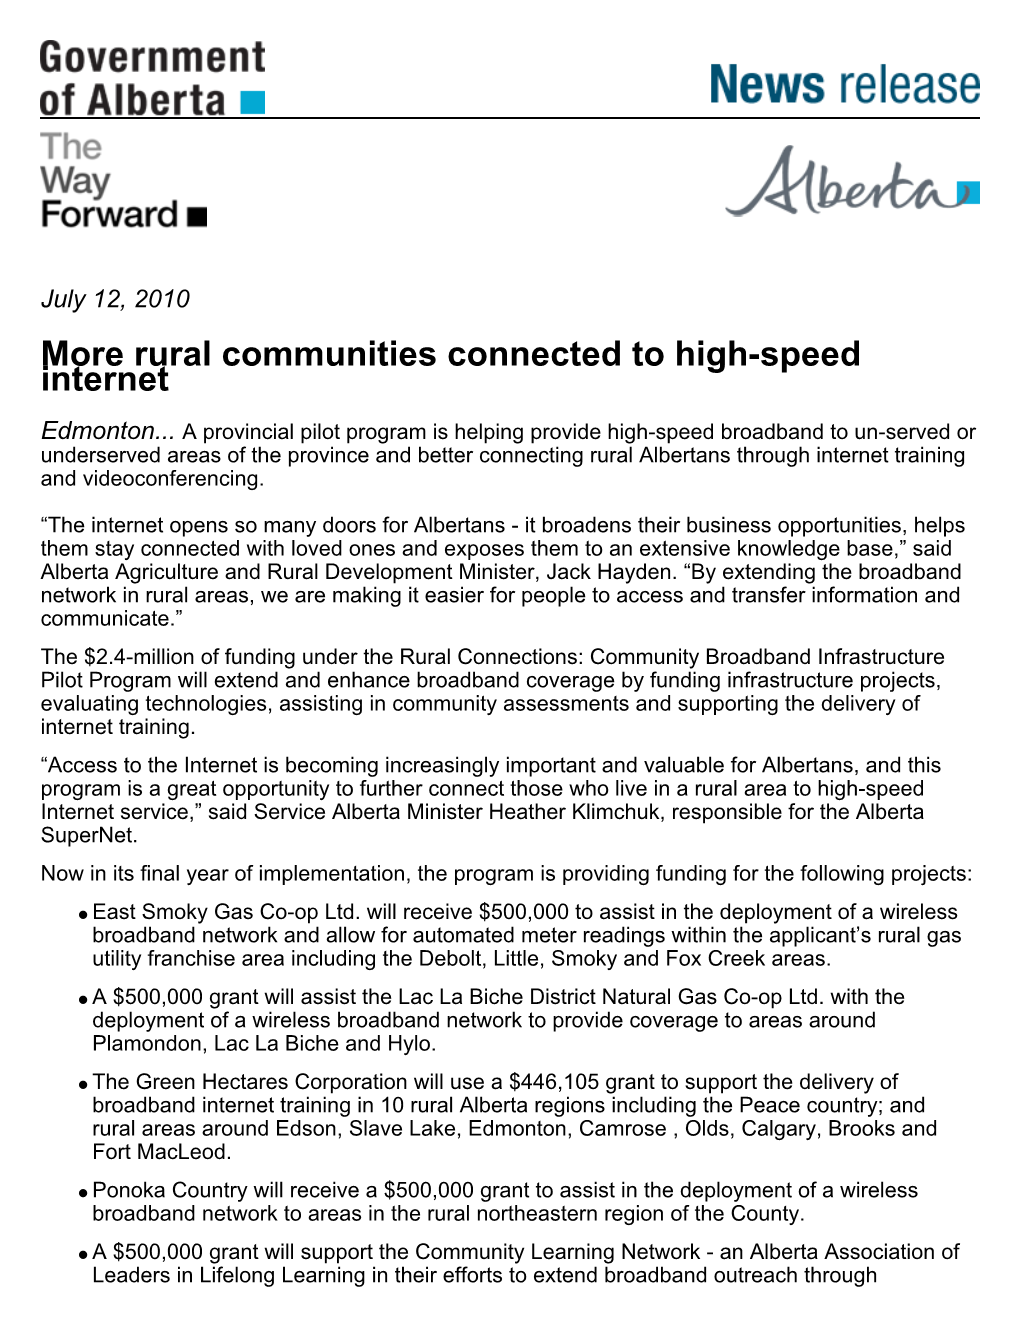 More Rural Communities Connected to High-Speed Internet